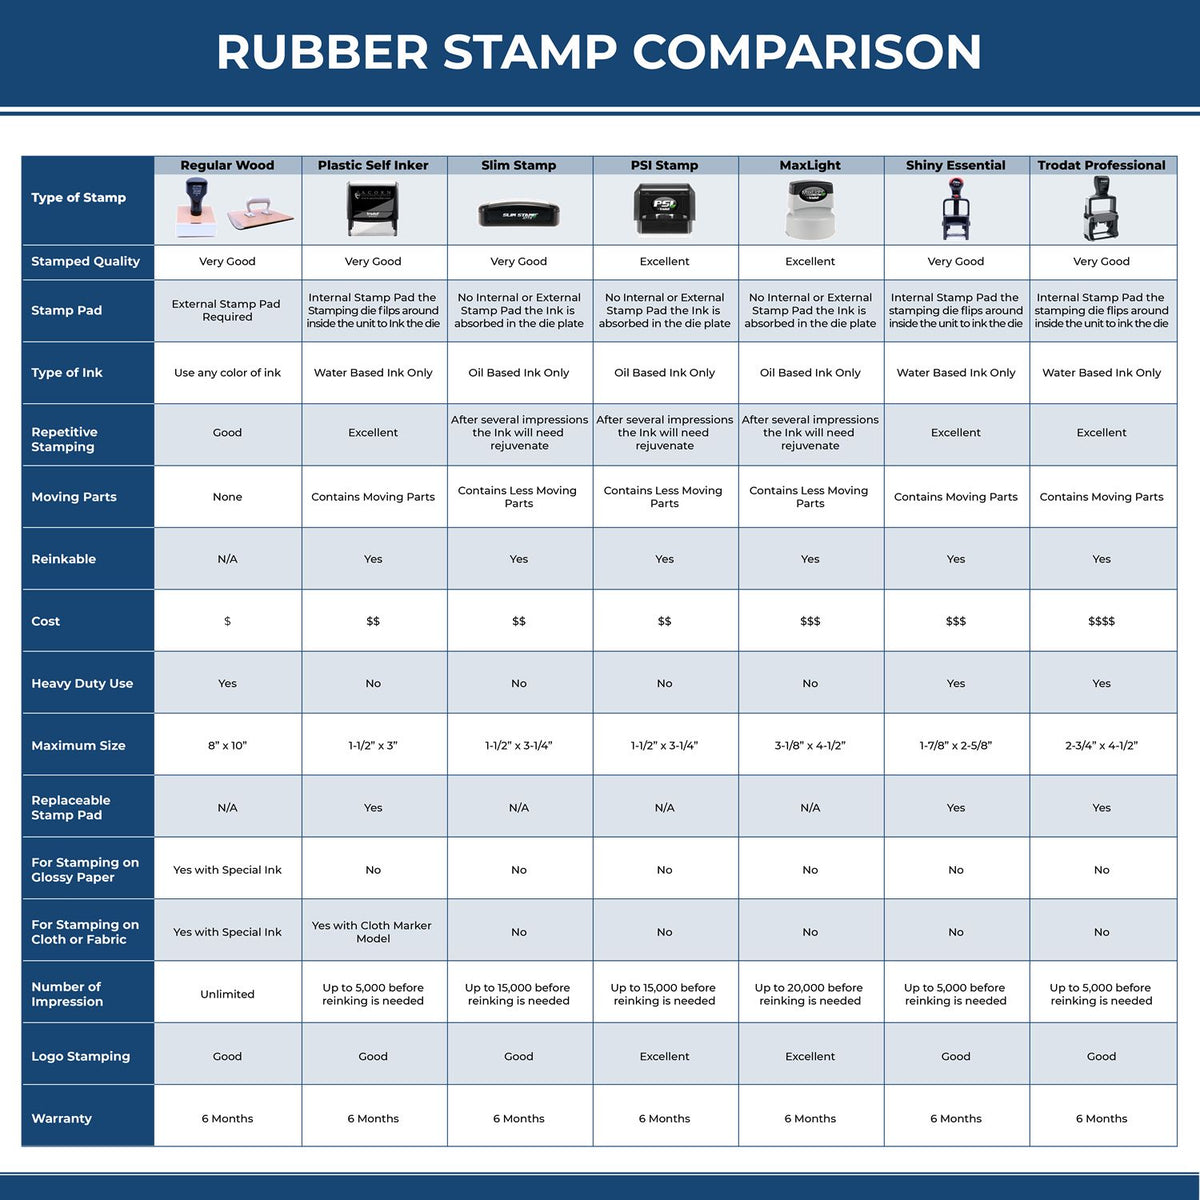 Large Pre-Inked Please Forward Attending Physicians Stamp 4941SLIM Rubber Stamp Comparison